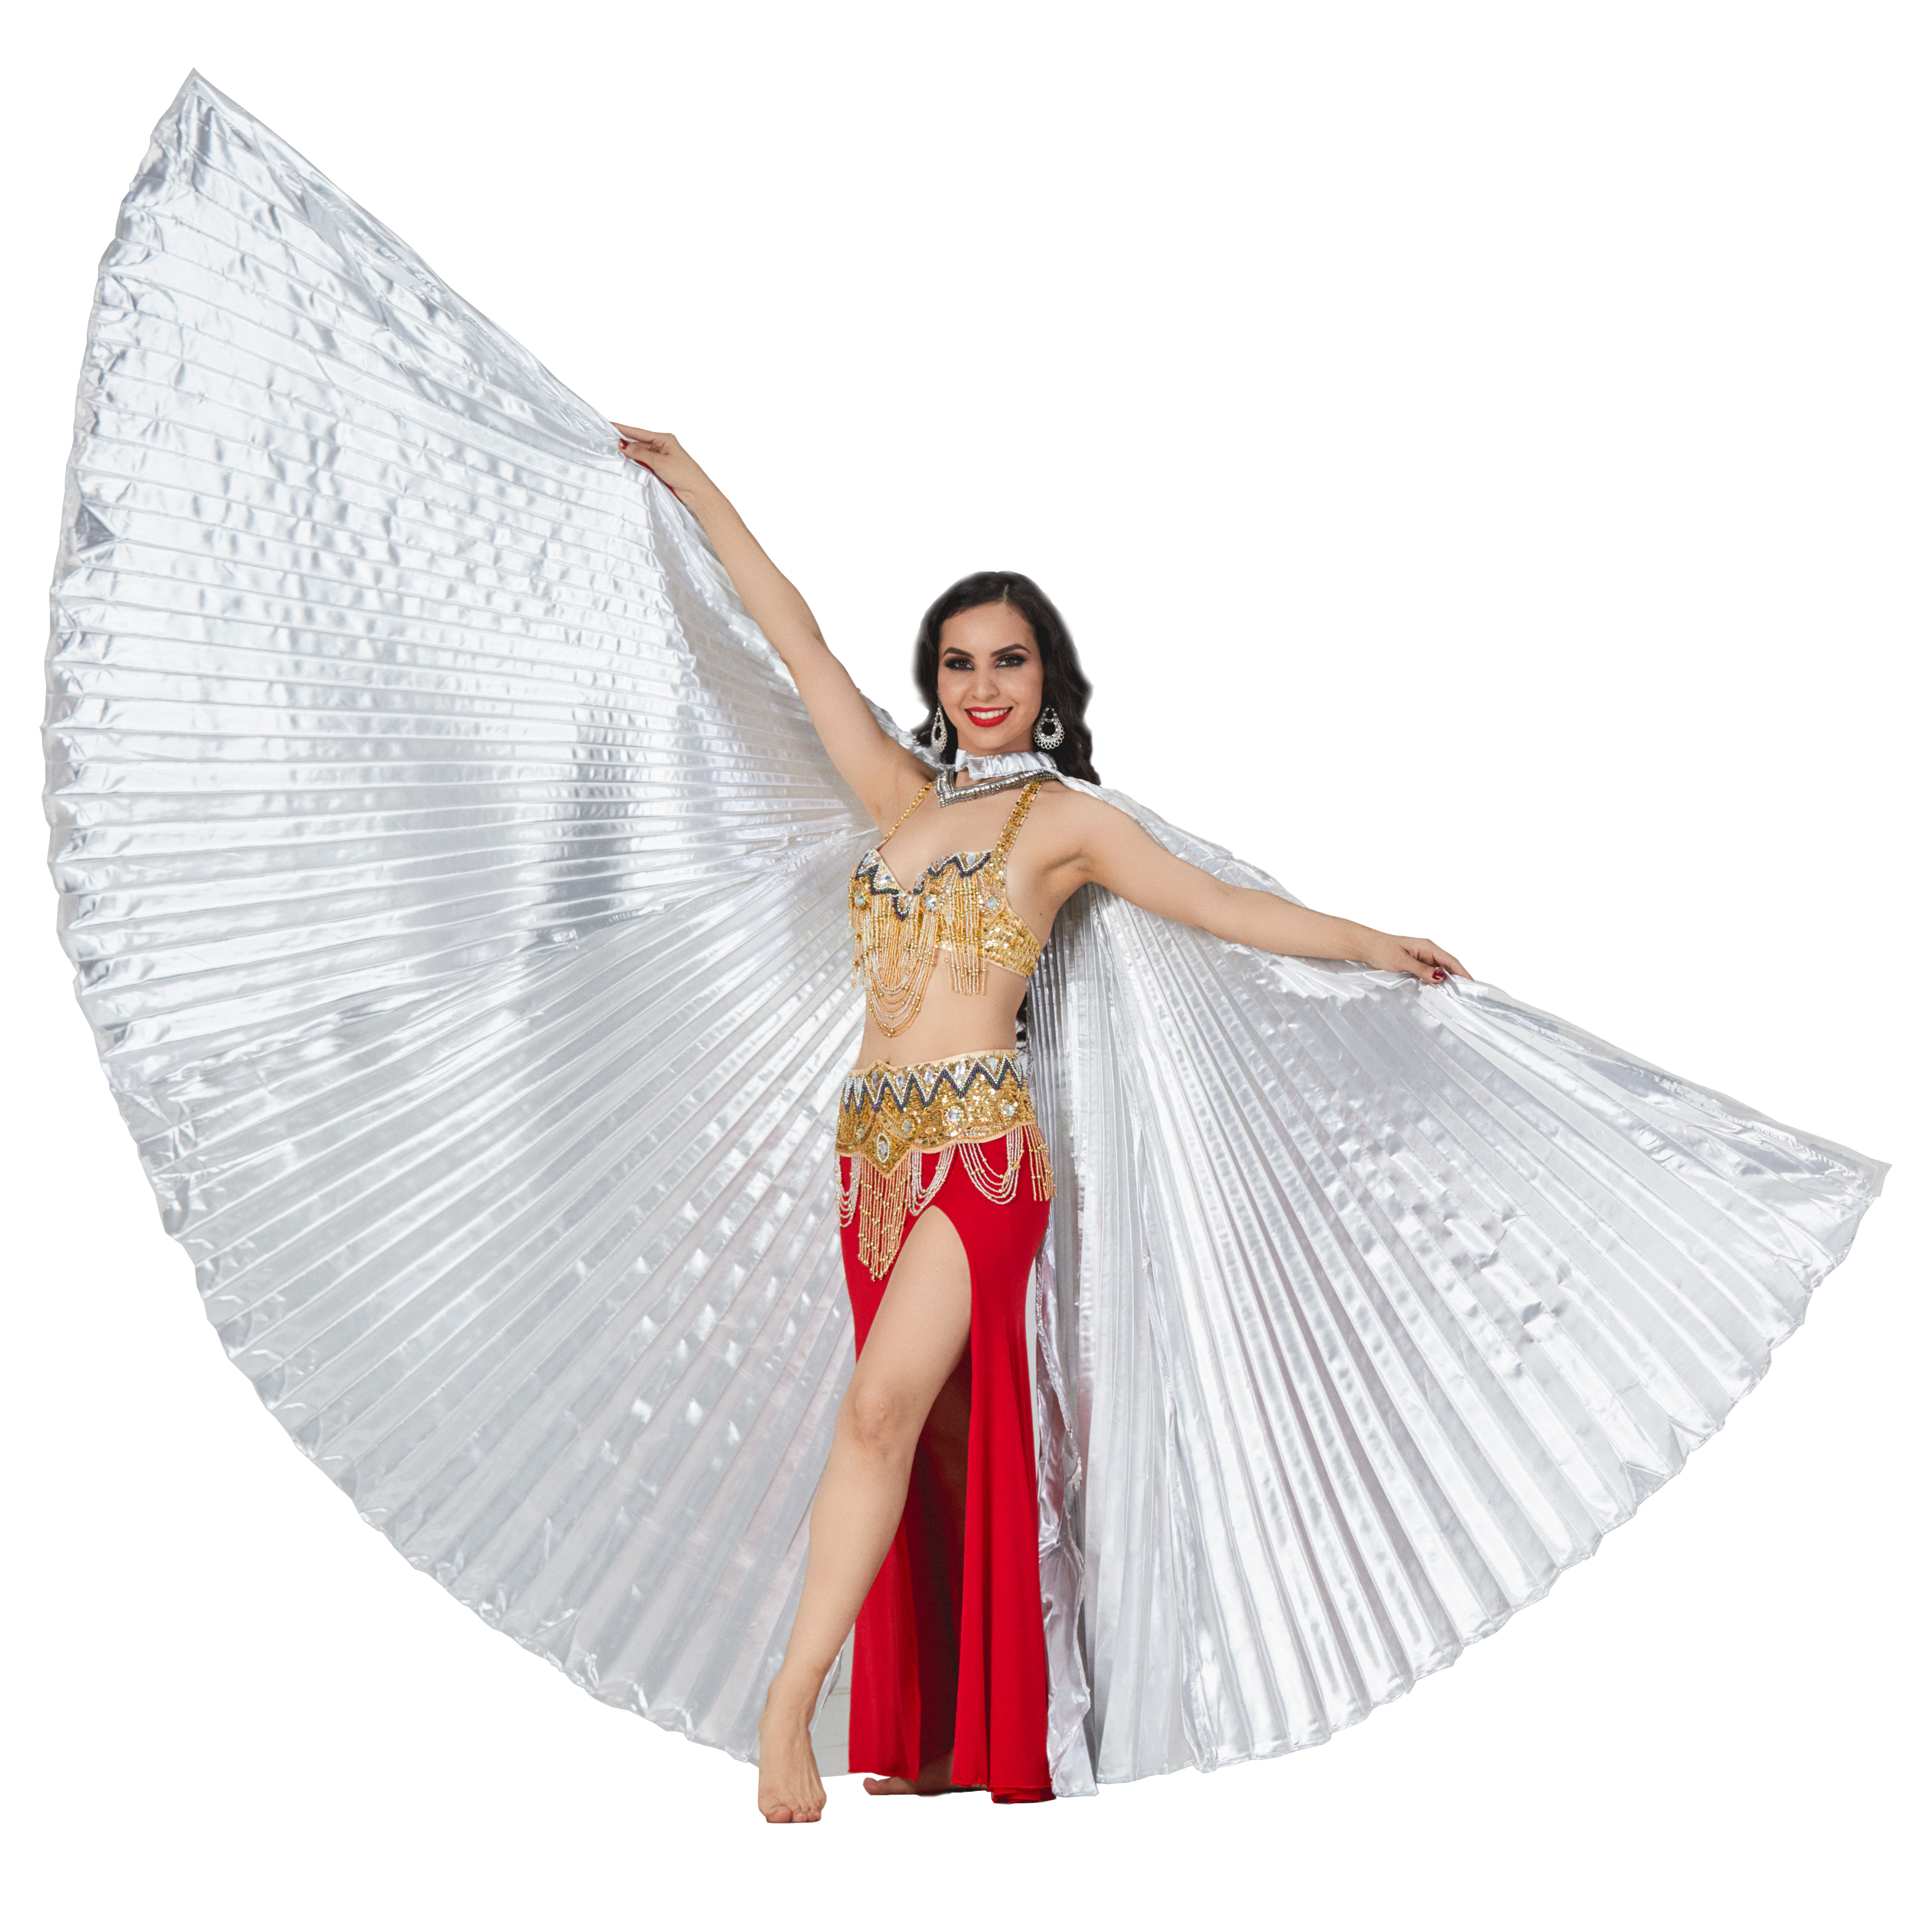 belly-dance-wings-with-stick-silver